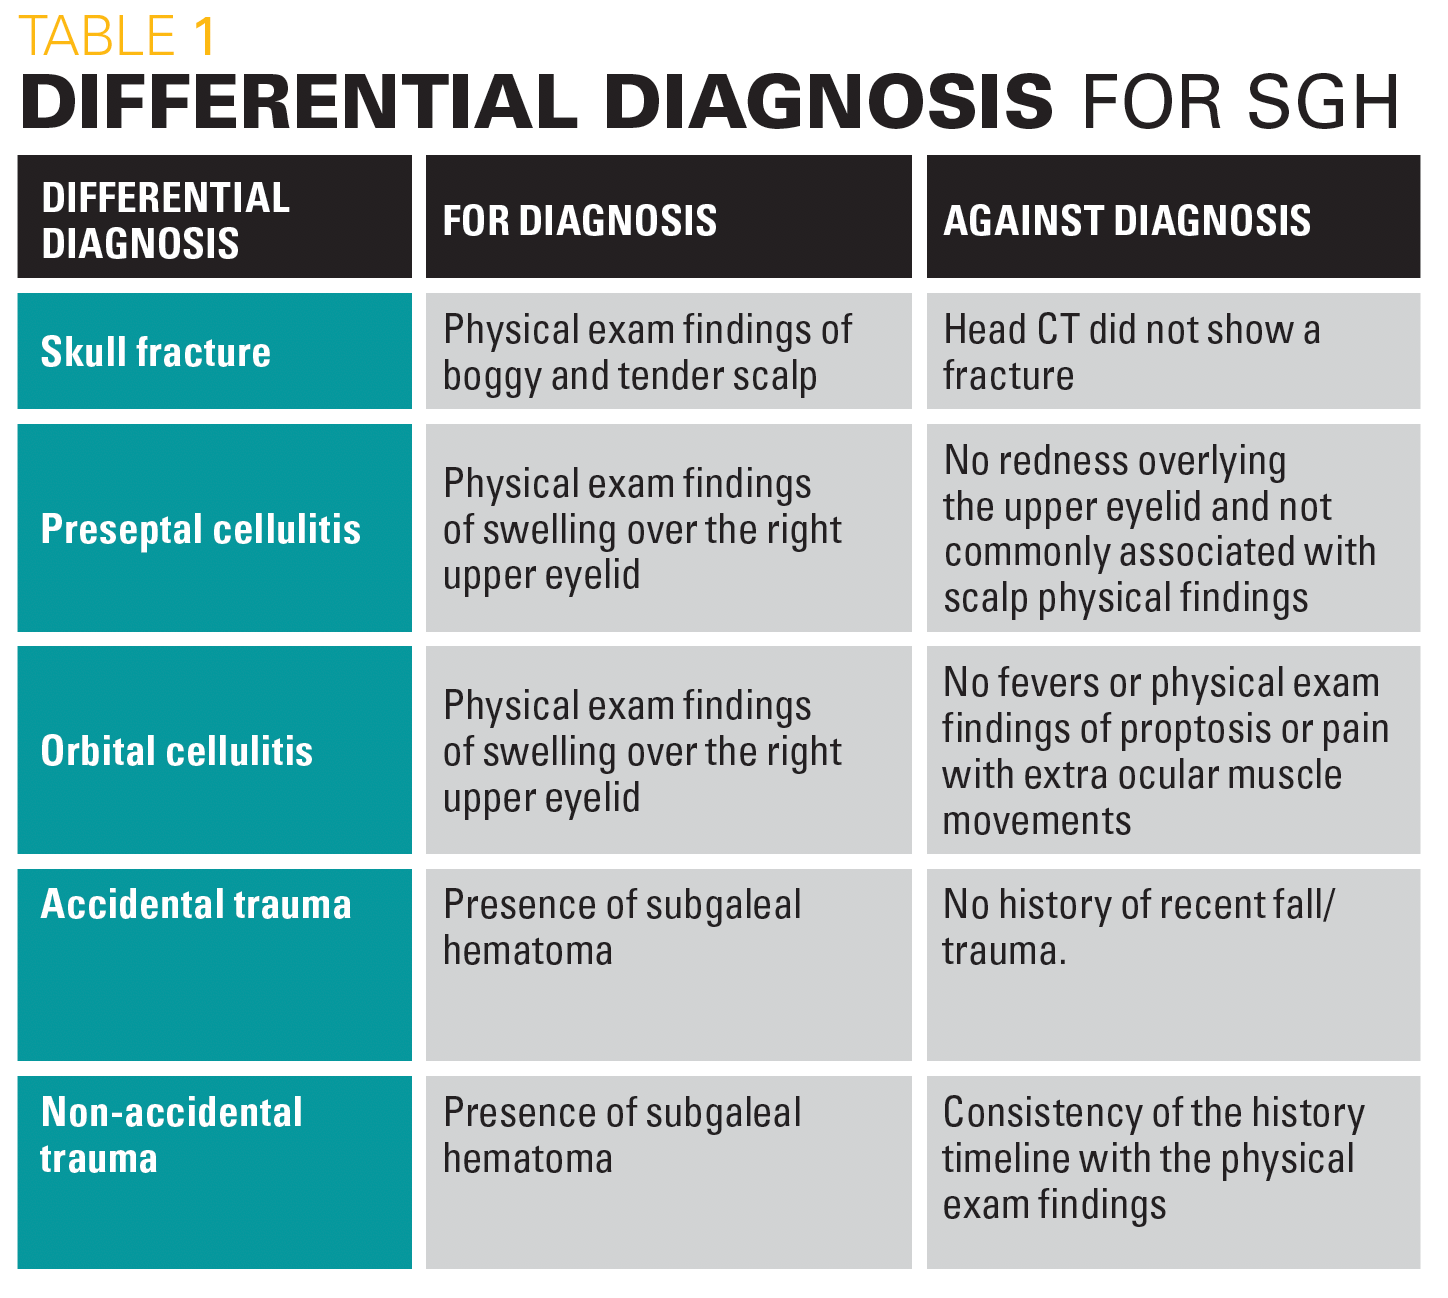 Differential diagnosis for SGH